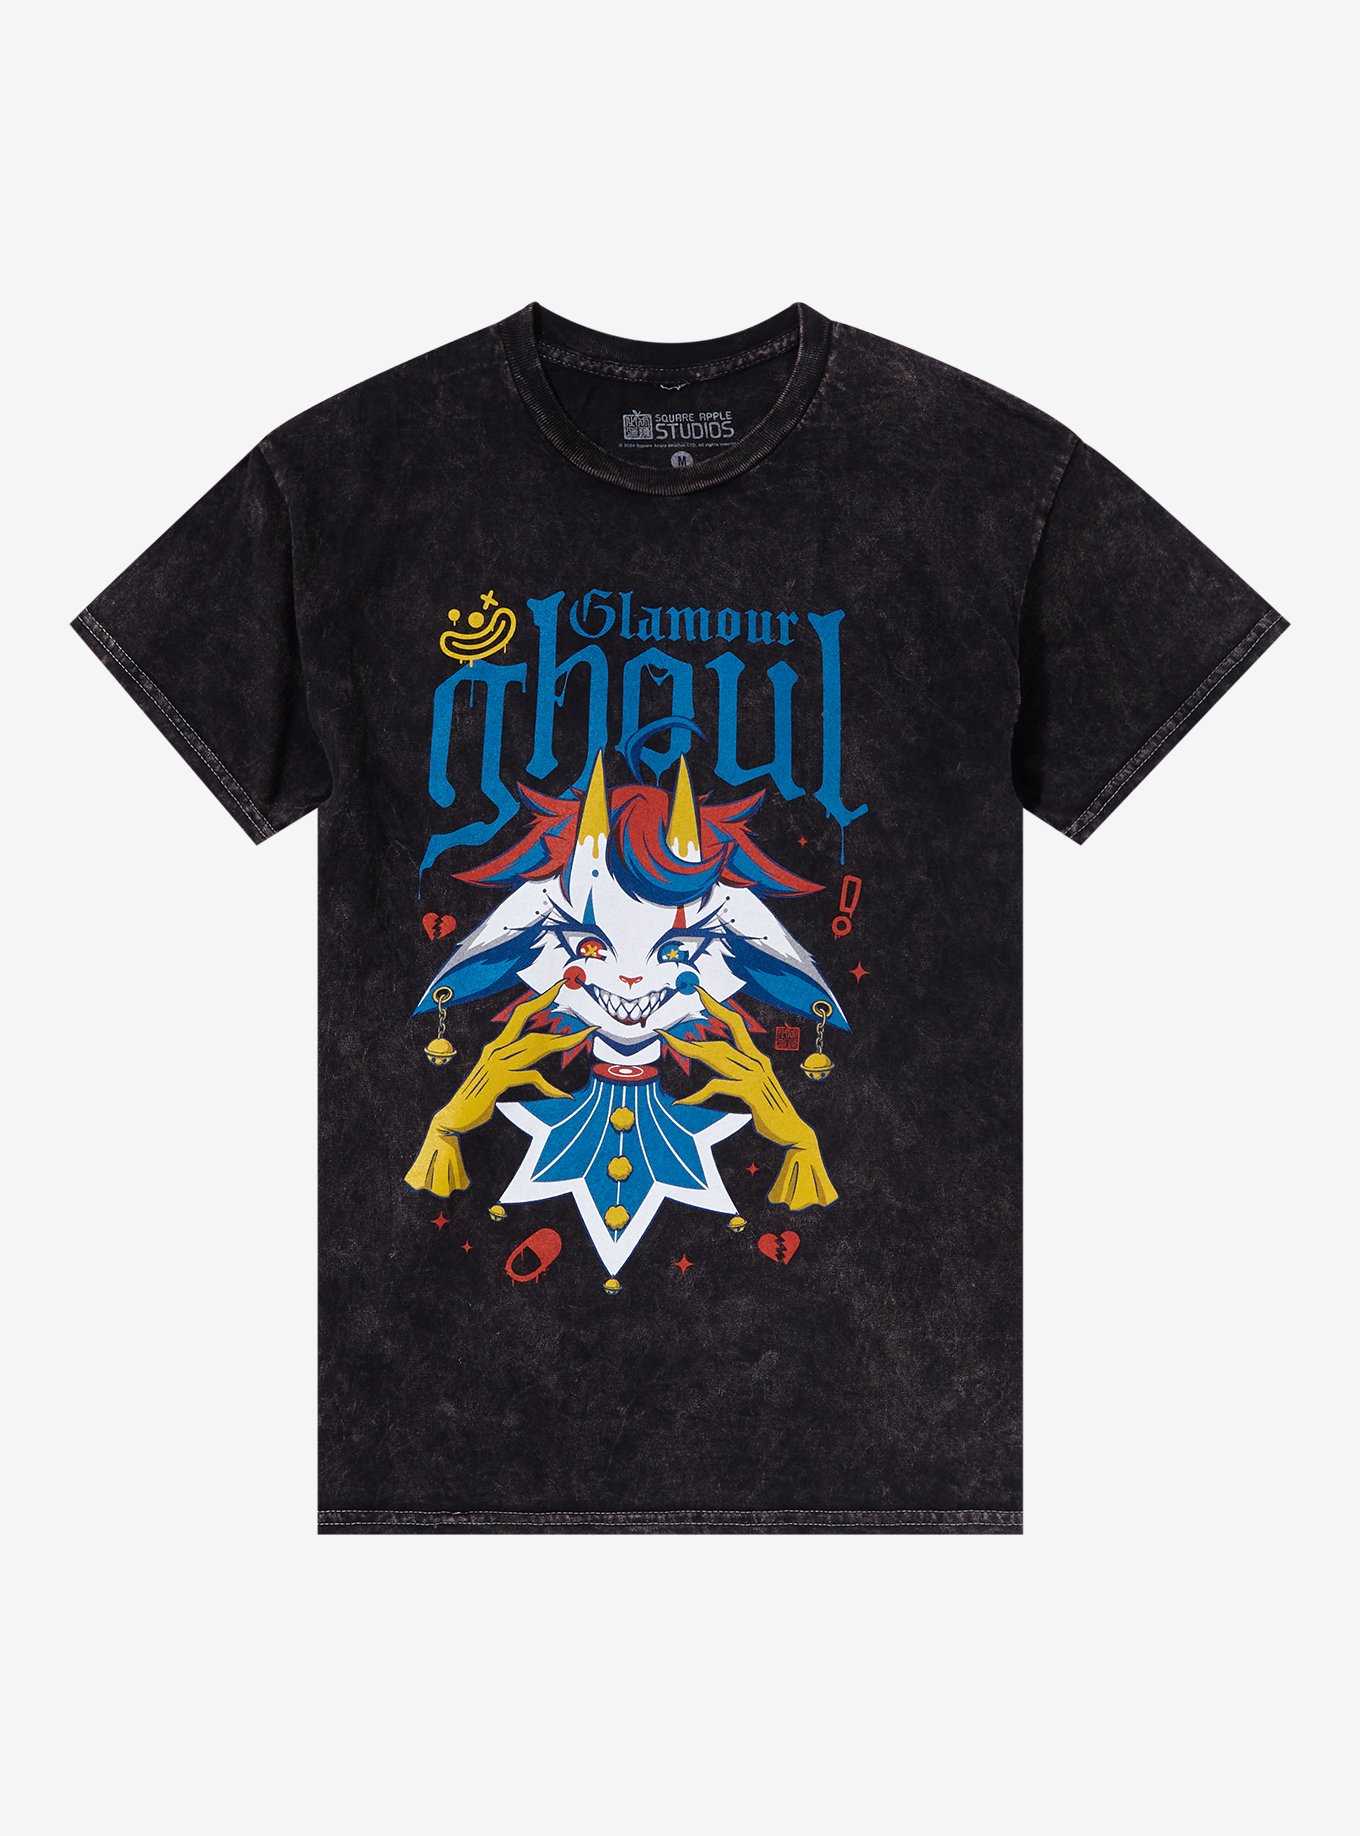 Glamour Ghoul Dark Wash T-Shirt By Square Apple Studios, , hi-res